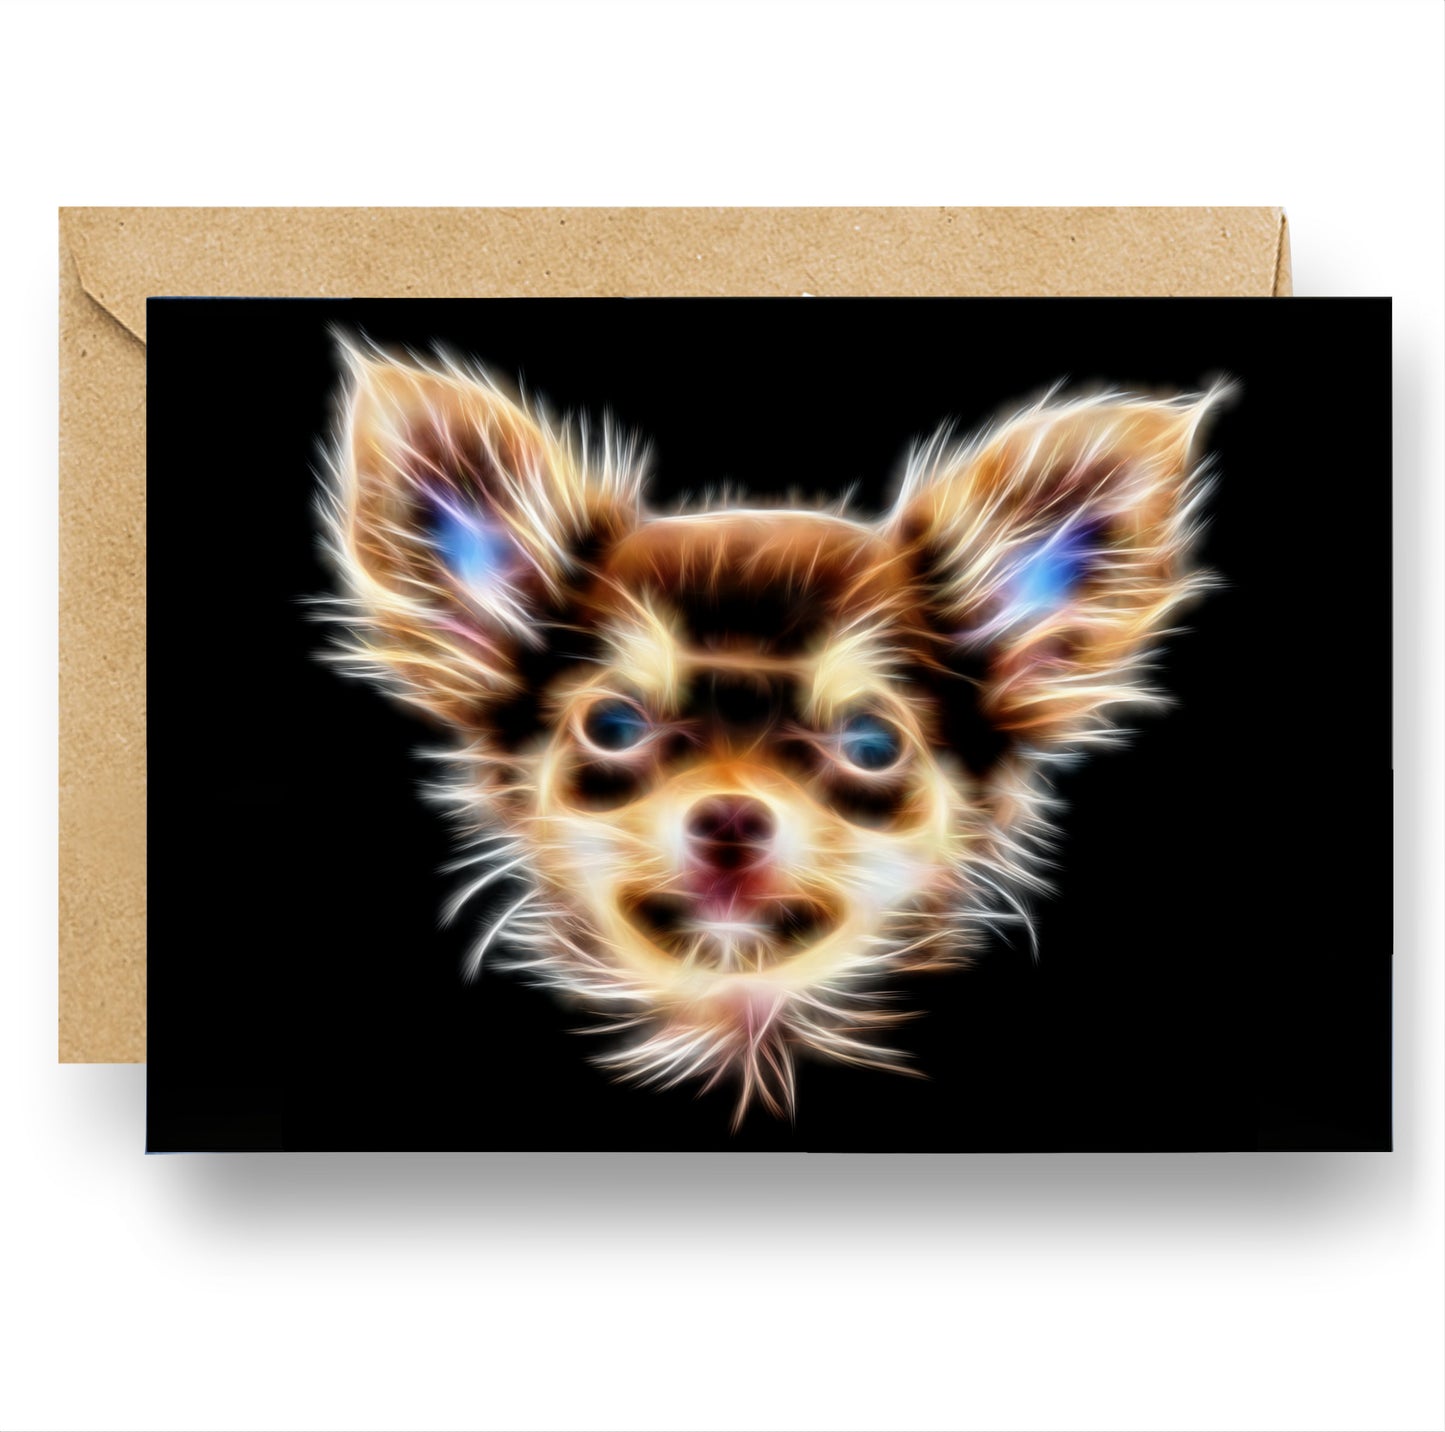 Chocolate and Tan Long Haired Chihuahua Blank Birthday Greeting Card with Stunning Fractal Art Design